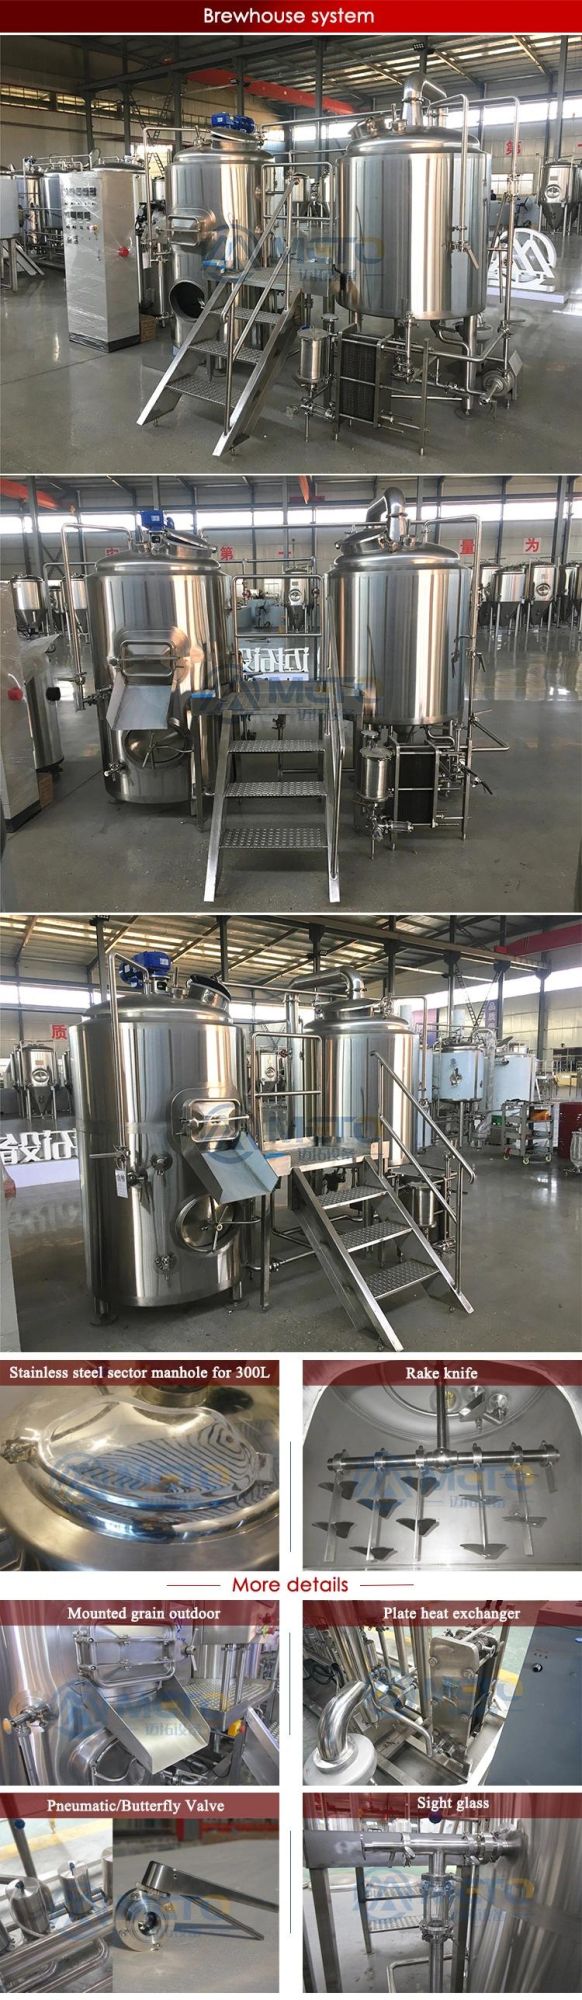 Manufacture Supplied 300L 3bbl Micro Beer Brewery Equipment for Bar